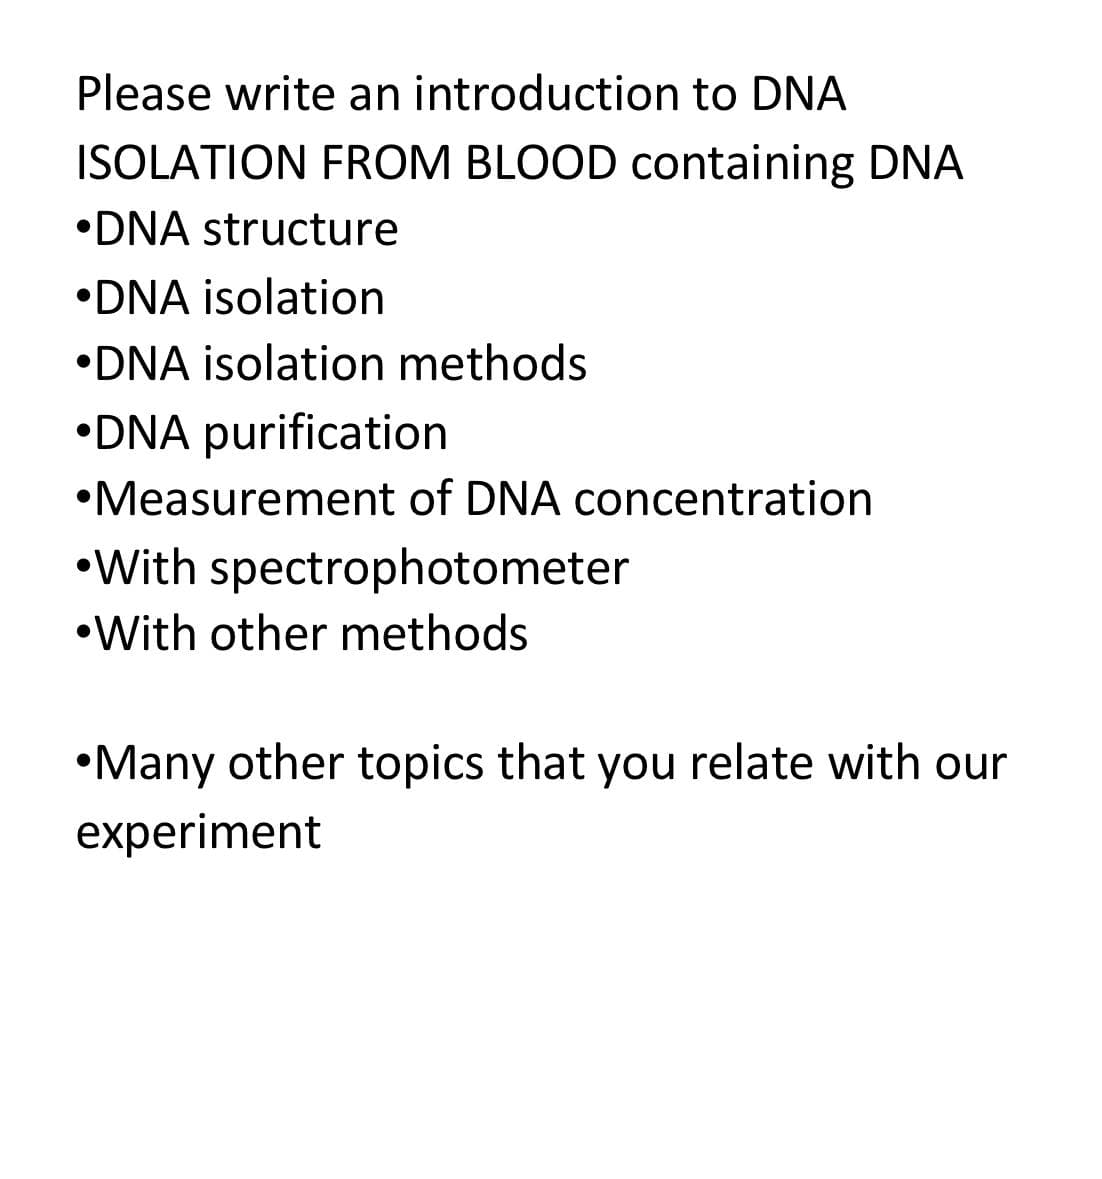 Please write an introduction to DNA
ISOLATION FROM BLOOD containing DNA
•DNA structure
•DNA isolation
•DNA isolation methods
•DNA purification
•Measurement of DNA concentration
•With spectrophotometer
•With other methods
•Many other topics that you relate with our
experiment
